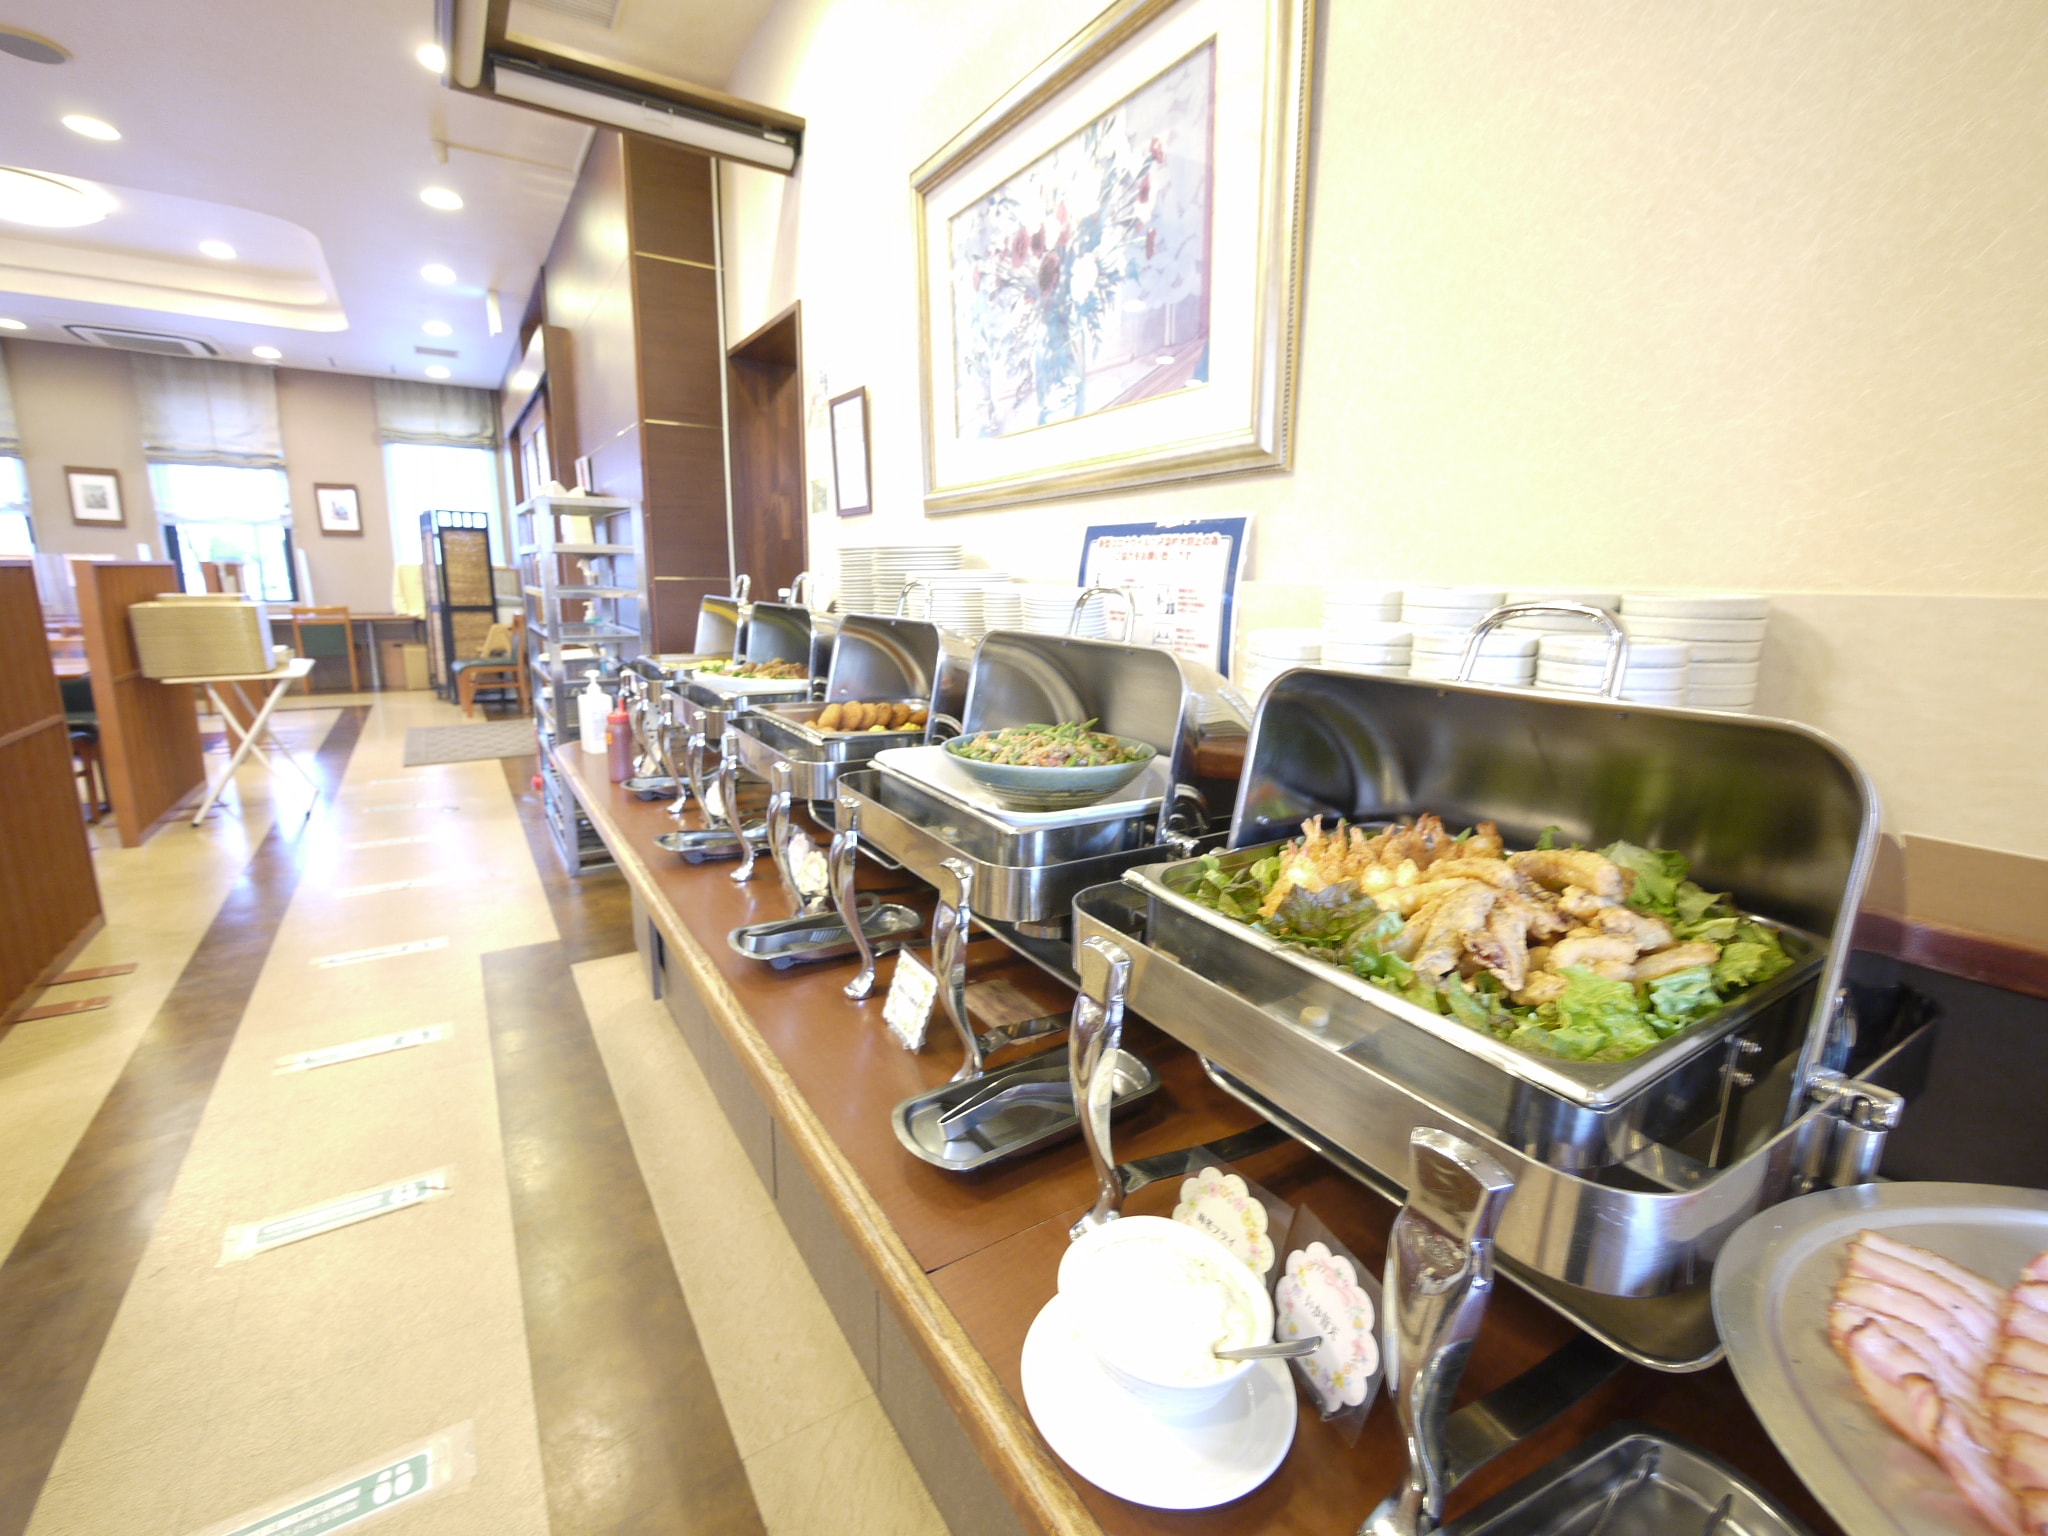 [Breakfast] Japanese and Western buffet available from 6:30 to 9:00.